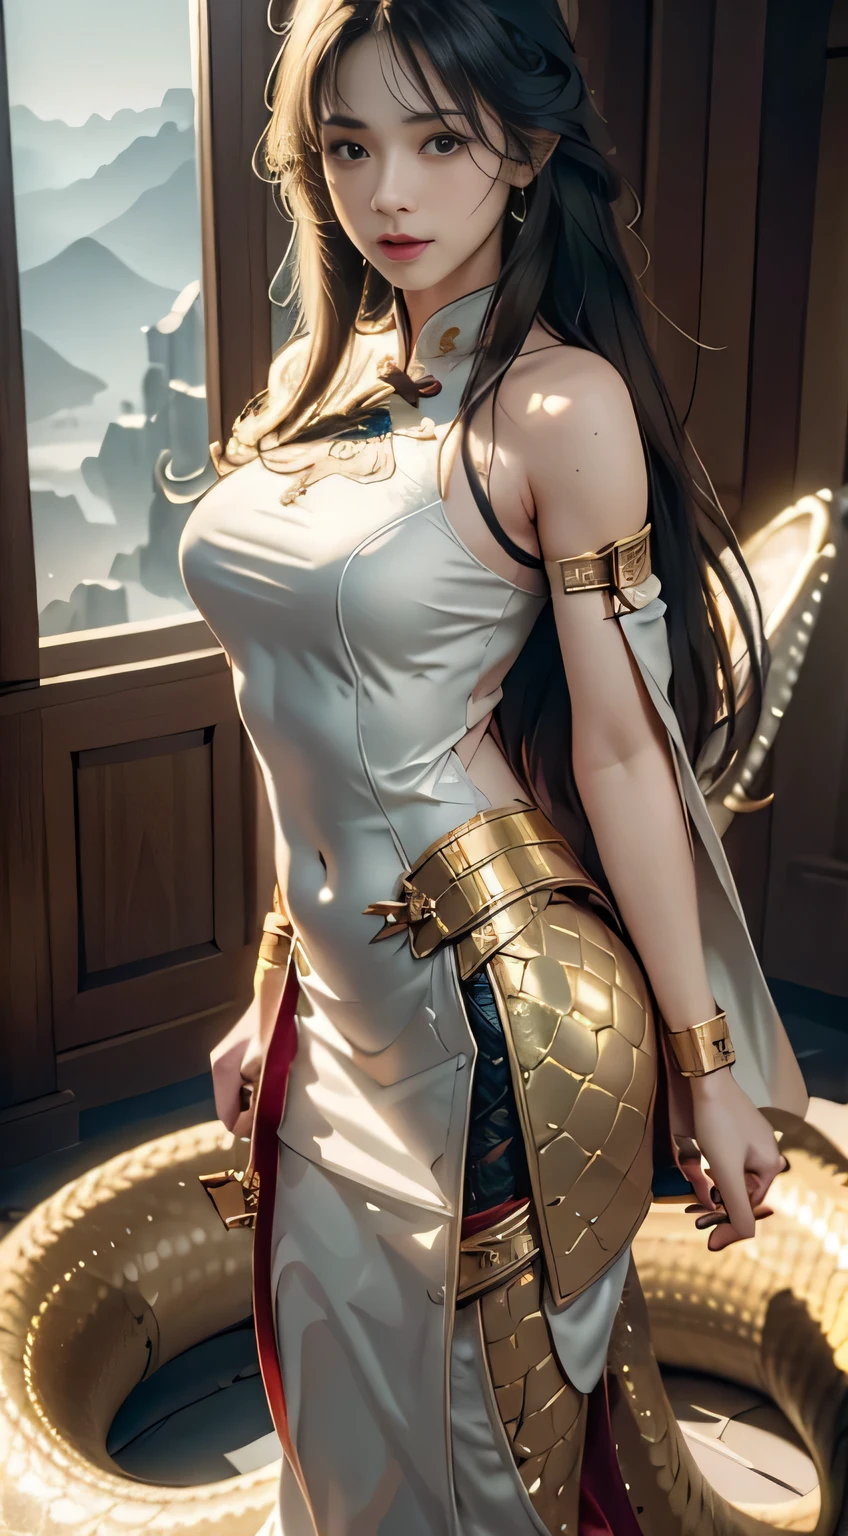 ((best quality)), ((masterpiece)), (detailed:1.4), 3D,fly in the sky，White Cloud， A beautiful Chinese classical palace costume,Classical Hanfu，Human snake tail。Human snake tail。Human snake tail。Nuwa Goddess，Gold armor dress，Long black hair flutters in the wind，Full body portrait，Handheld weapons，At the top of Kunlun Mountain，HDR (High Dynamic Range),Ray Tracing,NVIDIA RTX,Super Resolution,Unreal 5,Subsurface scattering,PBR Textures,Post-Processing,Anisotropic filtering,Depth of Field,Maximum clarity and sharpness,Multi-layered textures,Albedo and Specular Maps,Surface Shading,Accurately simulate the interaction of light with materials,Perfect proportion,Octane Rendering,Two-color lighting,Large aperture,Low ISO,White Balance,Rule of Thirds,8K Native,